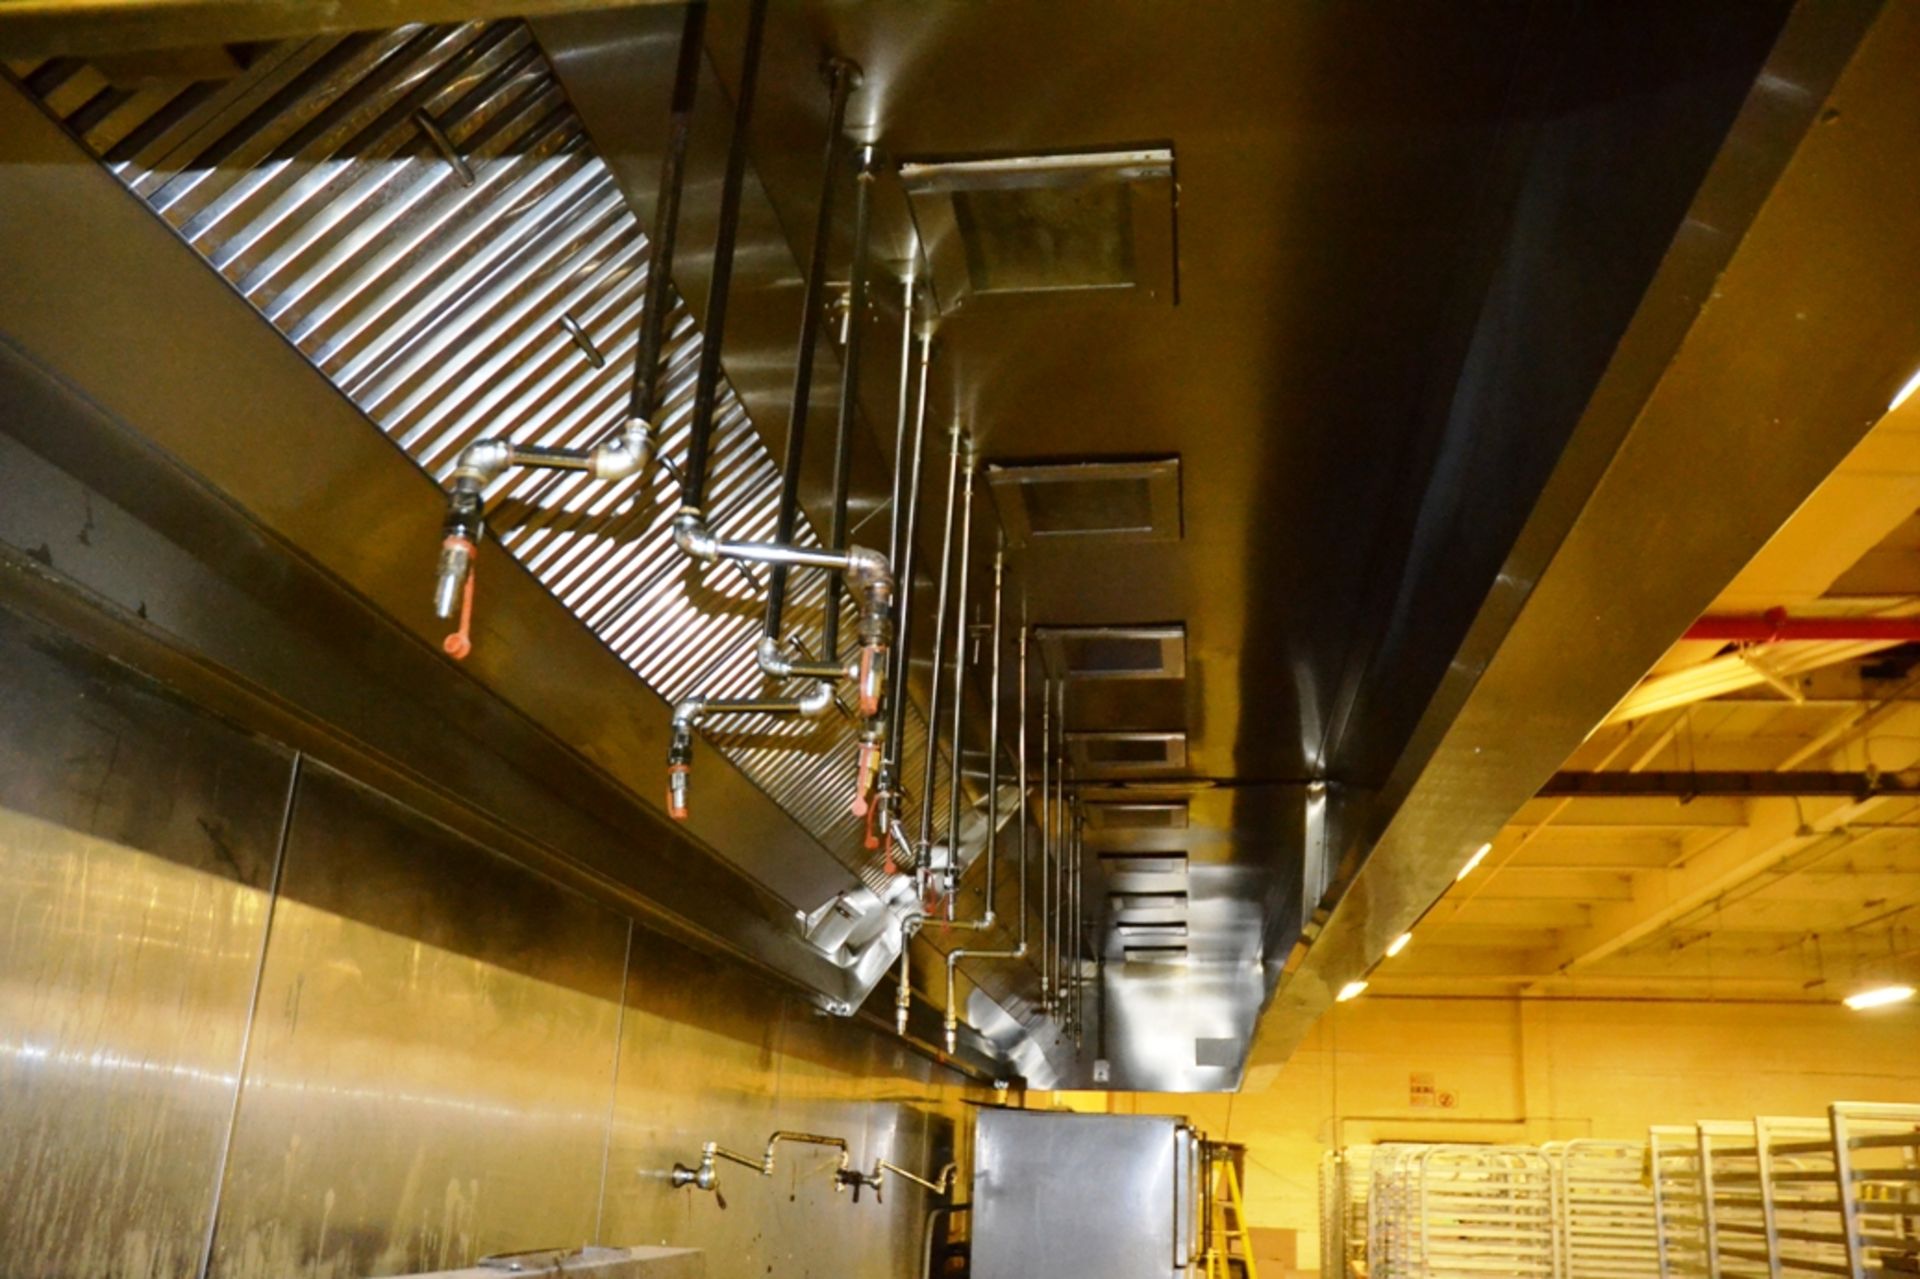 Gaylord 3'x28' Stainless Steel Exhaust Hood with Ansul Fire System - Image 2 of 2